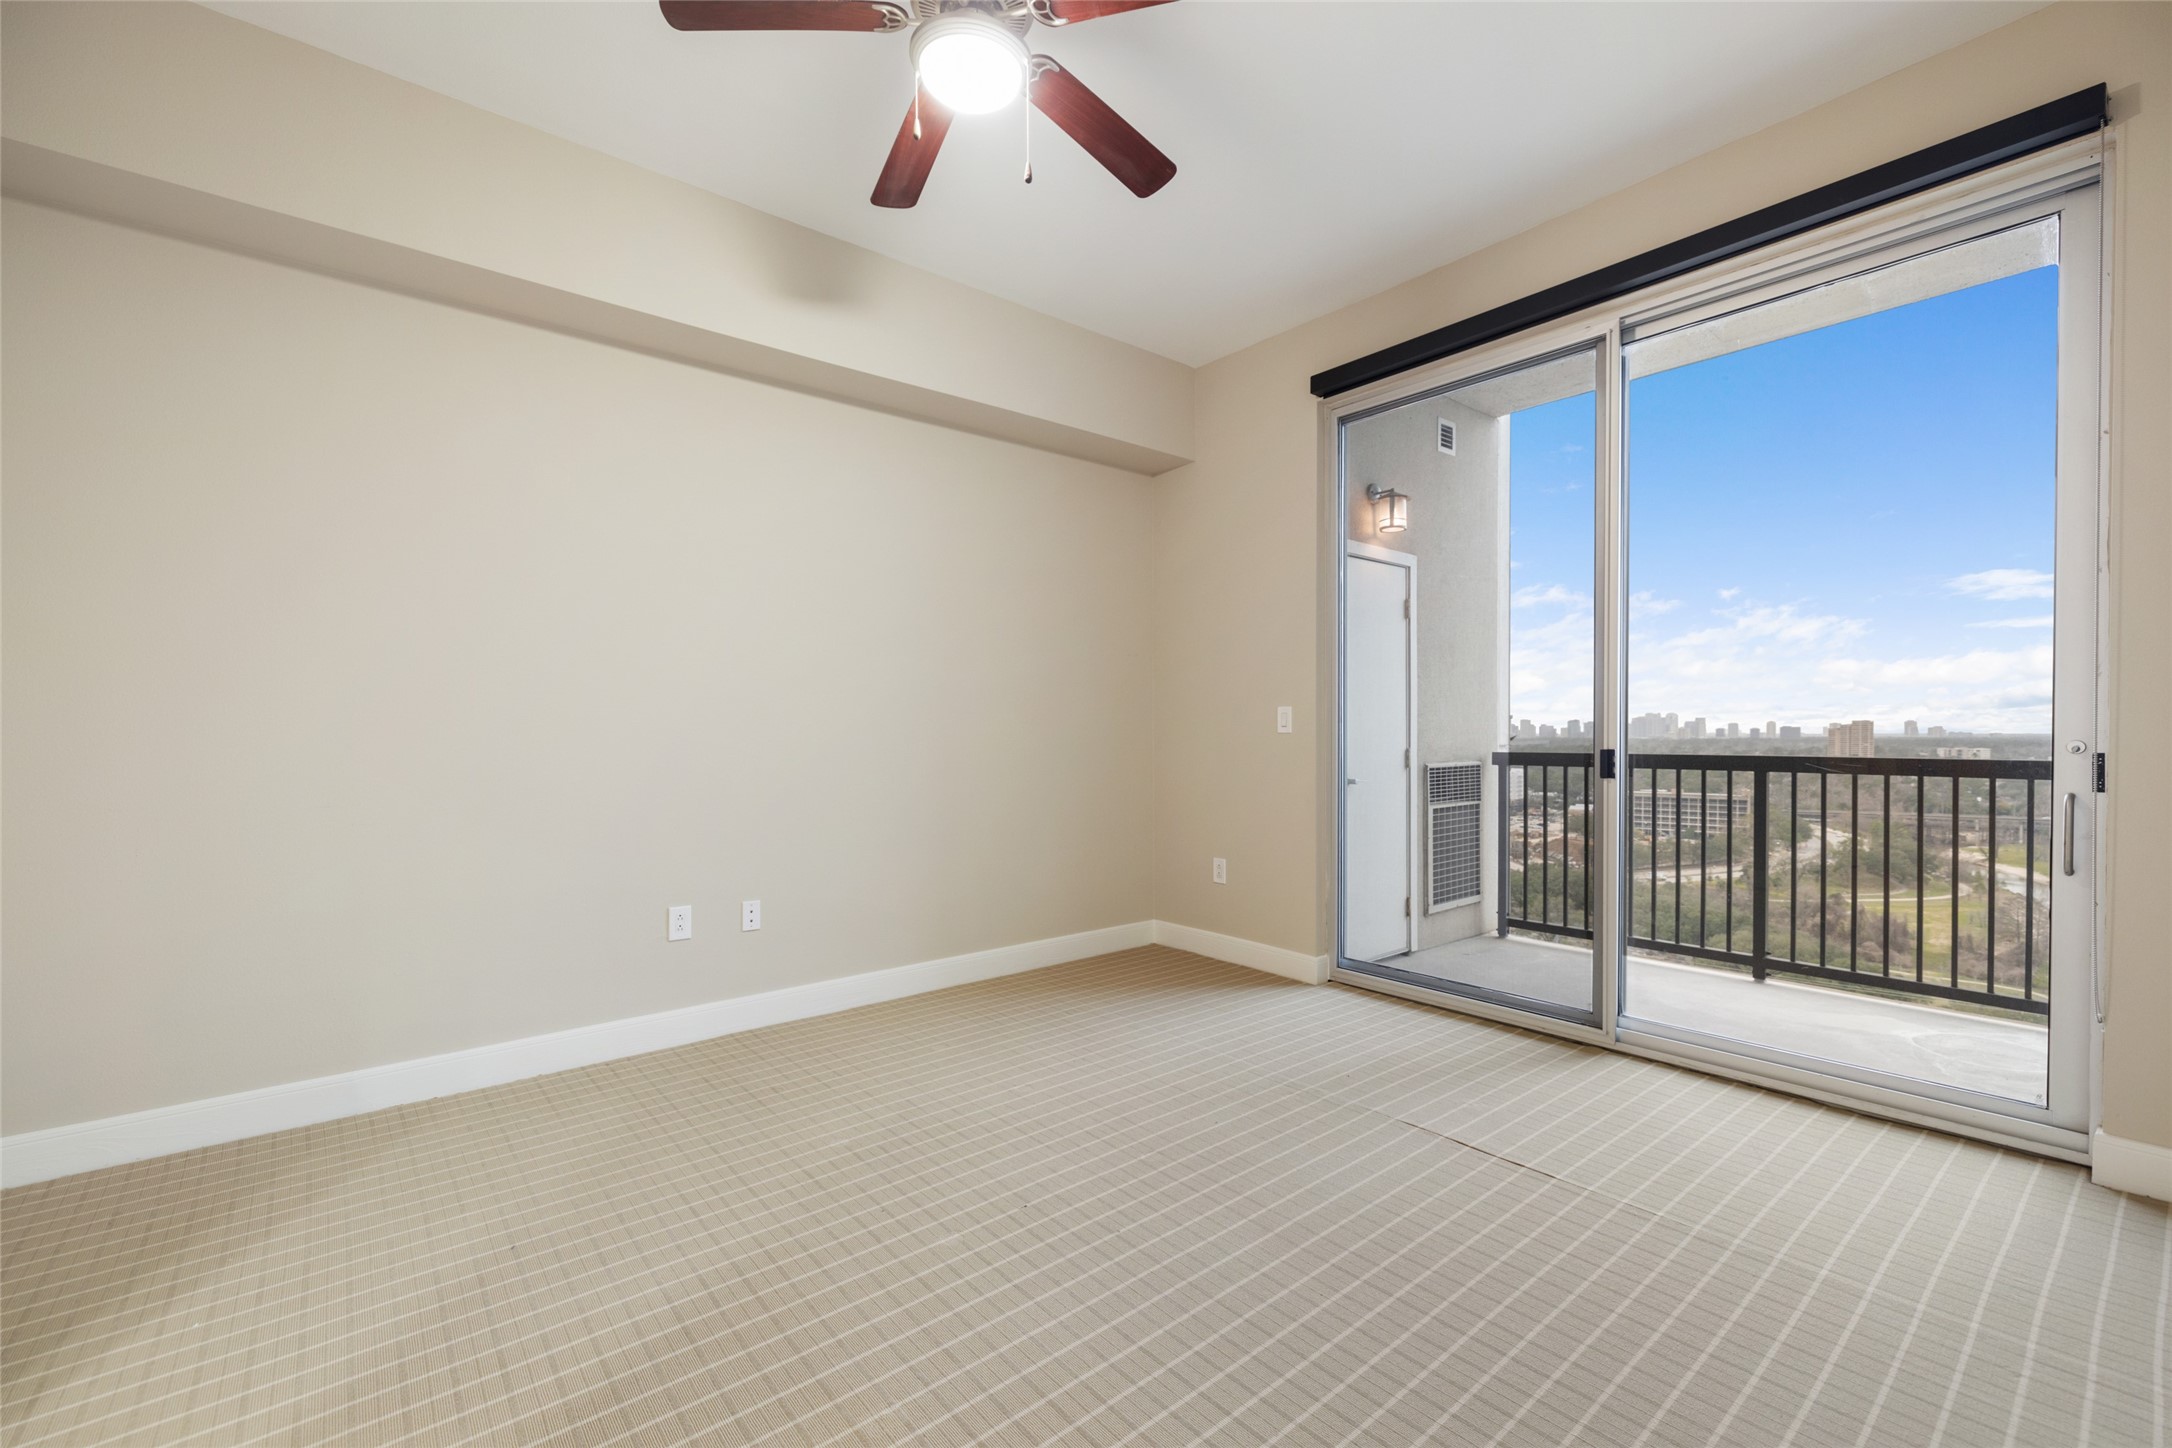 Large Bedroom with private patio with some of the best views in Houston! There is a small storage closet off the balcony.